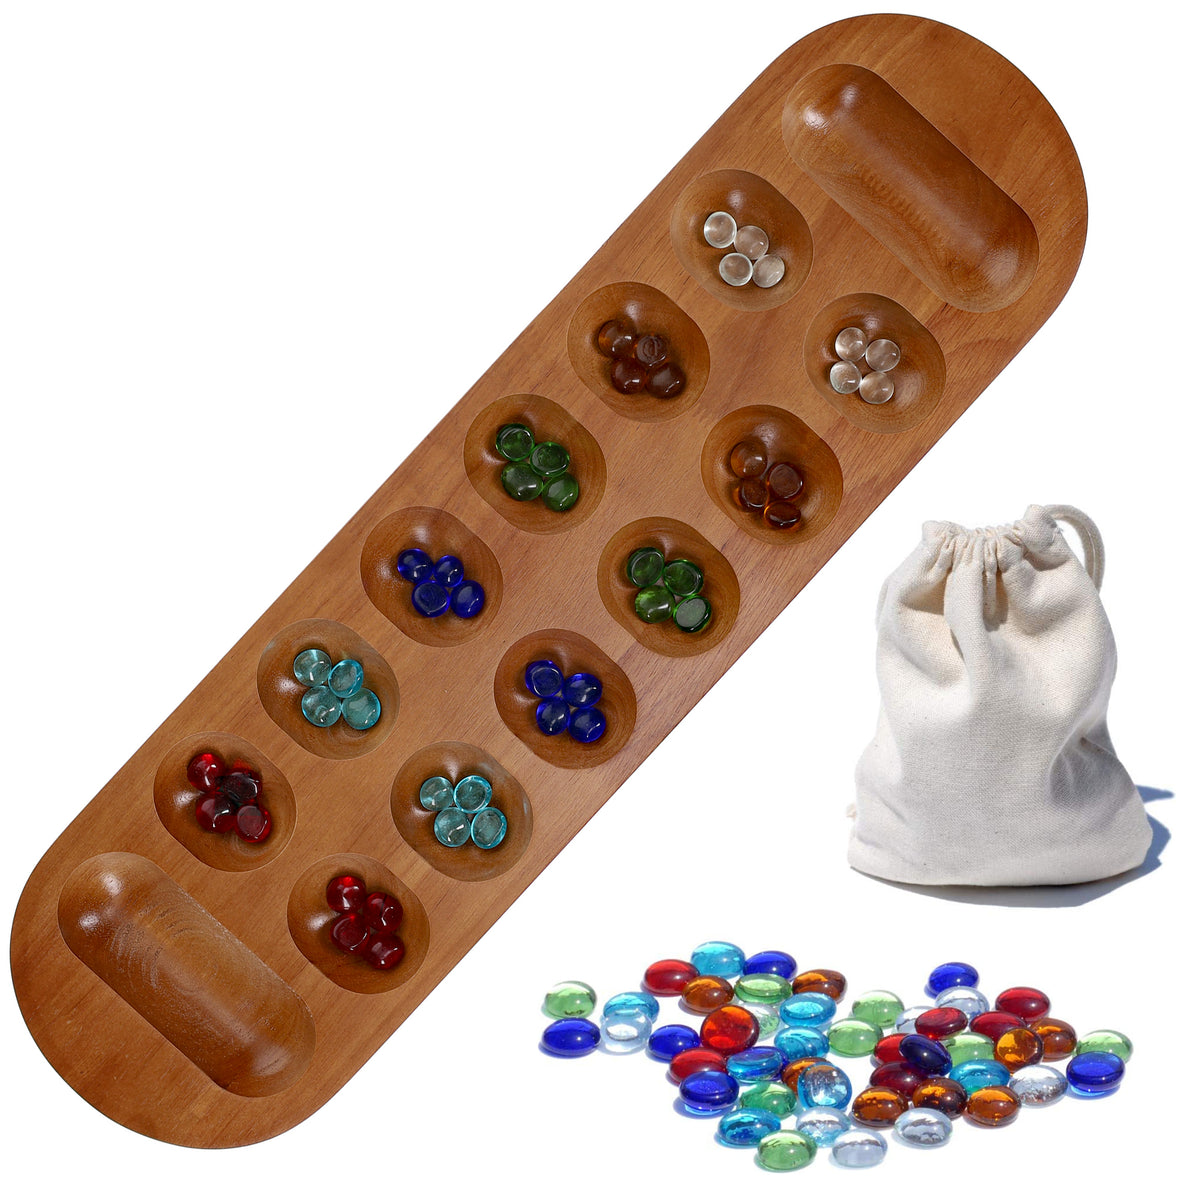 WE Games Mancala Board Game - 22 in., Solid Wood with Walnut Stain